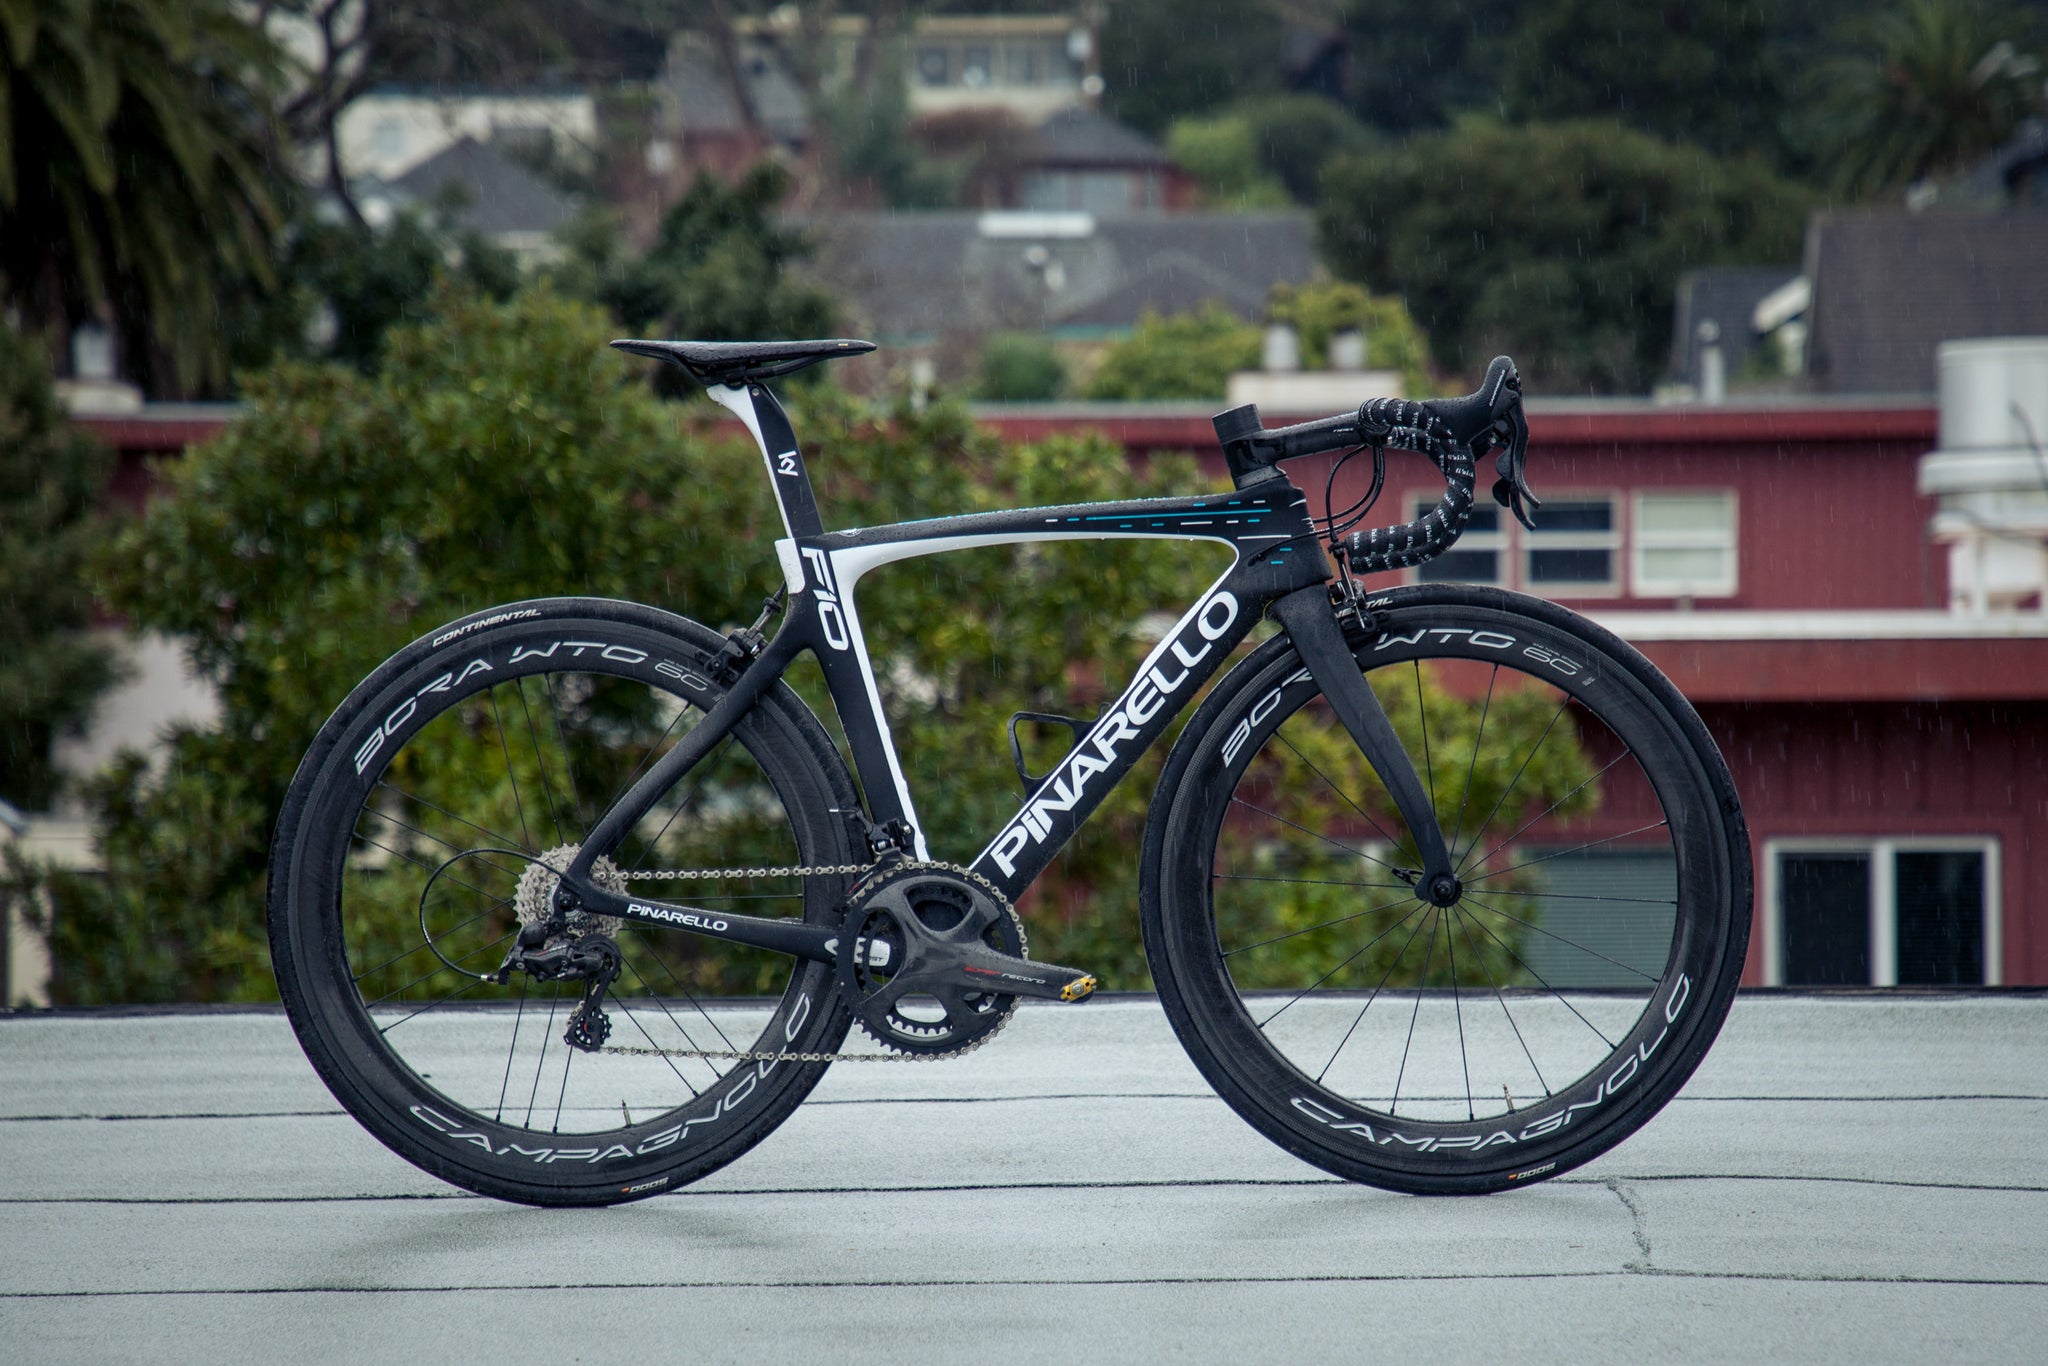 The Pinarello Dogma Shootout - F10, F10- Disc, and K10 – Above Category